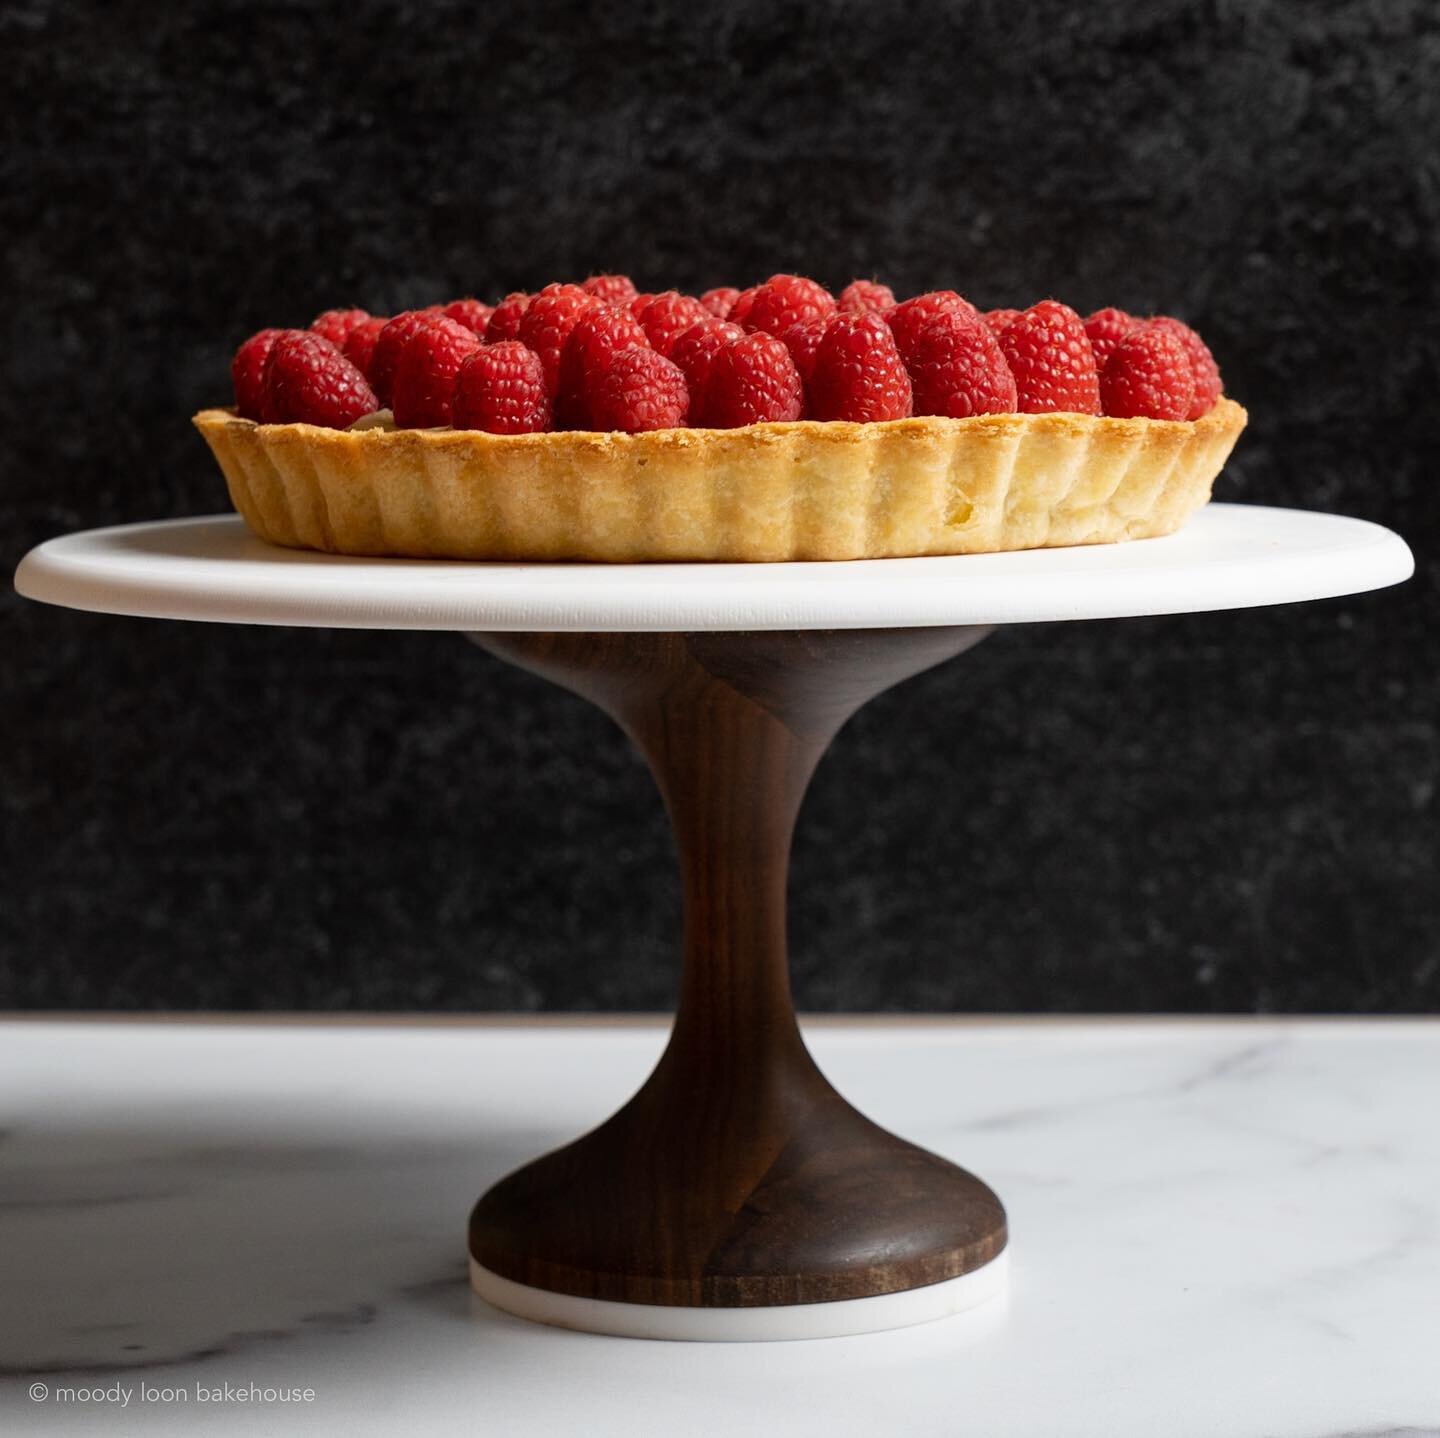 Skating in under the wire for #nationaldessertday! I could eat this one morning, noon, and night &mdash; and actually, I do when I make &lsquo;em. 😬 When I went to Paris last spring with my mom, we split a raspberry tart like this for dinner - no ap